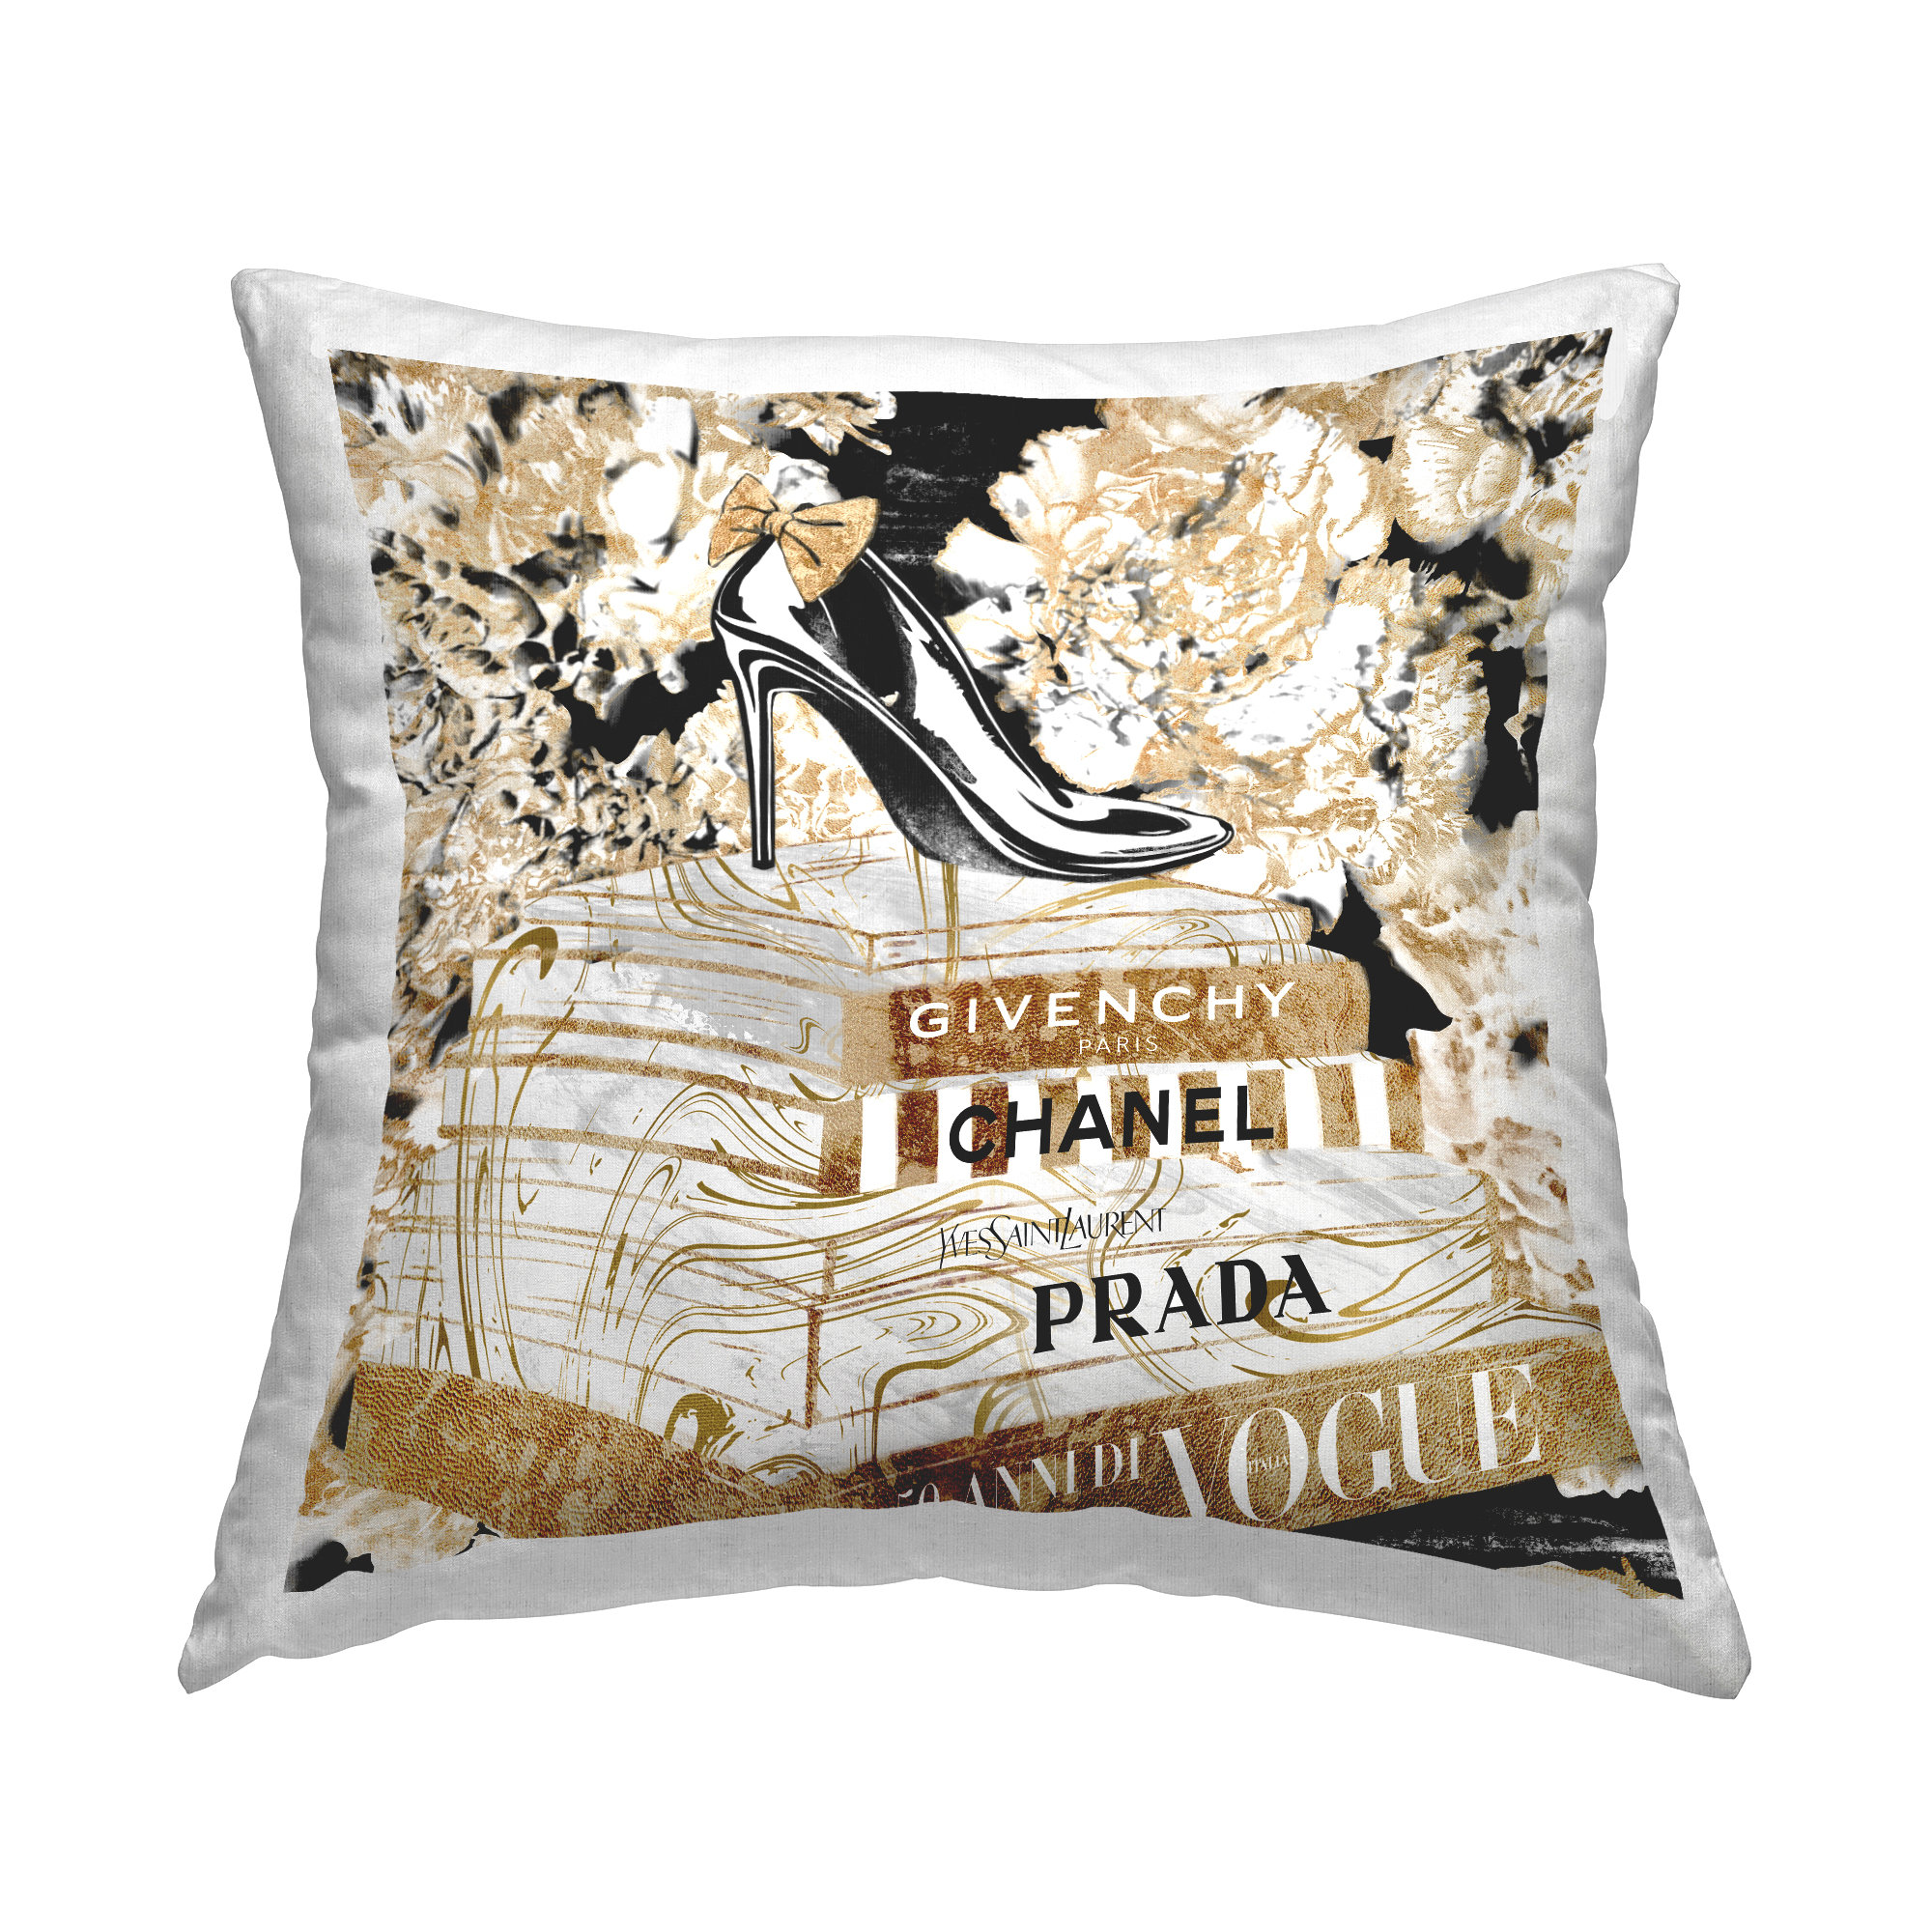 Stupell Industries No Decorative Addition Polyester Throw Pillow